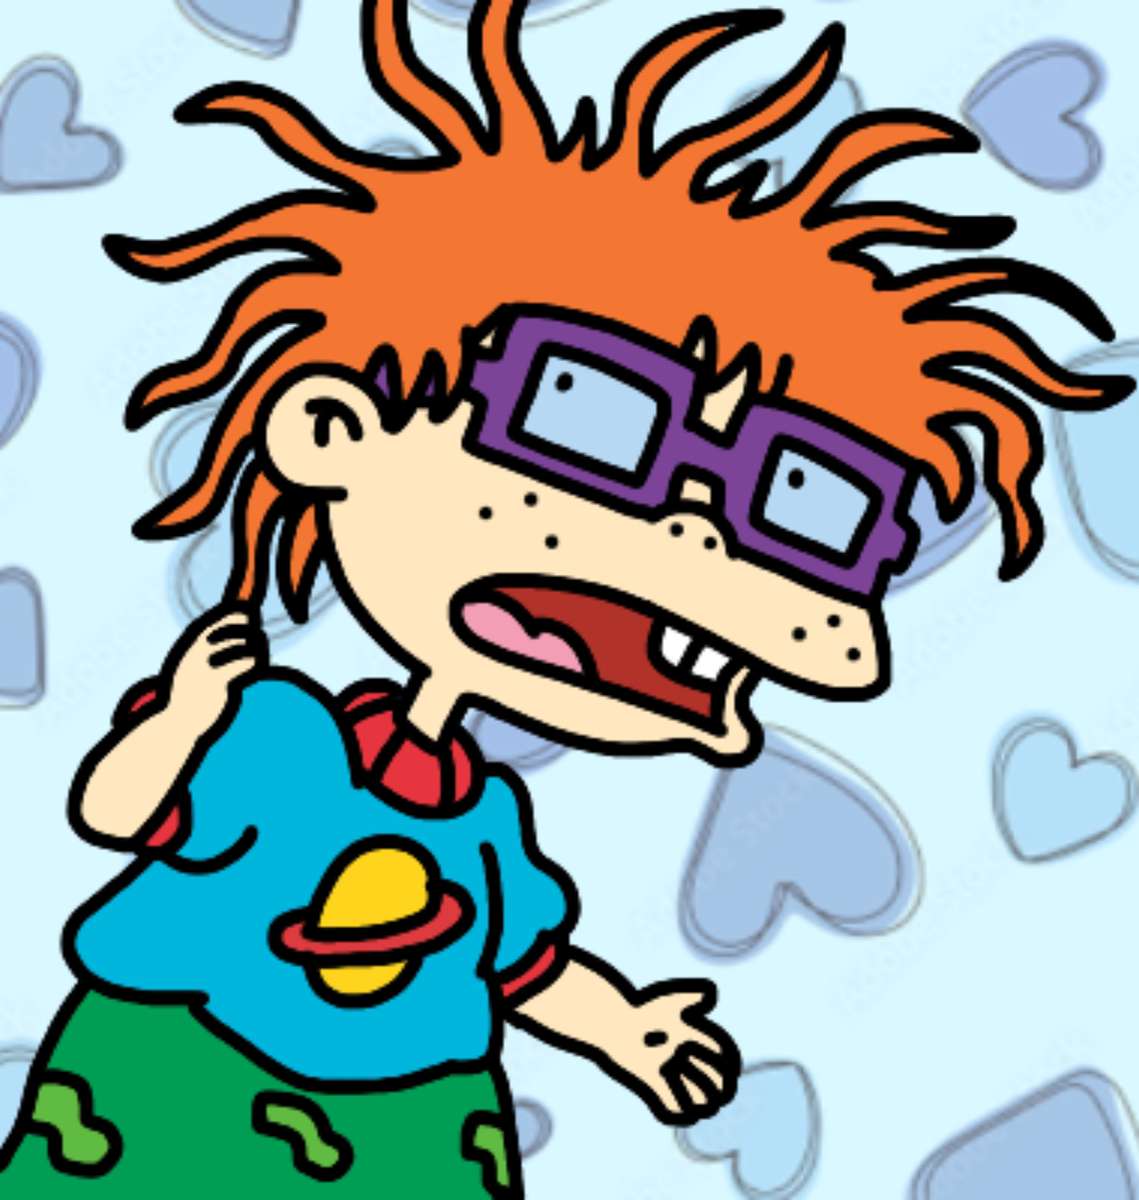 Chuckie Finster! ❤️❤️❤️❤️❤️❤️ jigsaw puzzle online